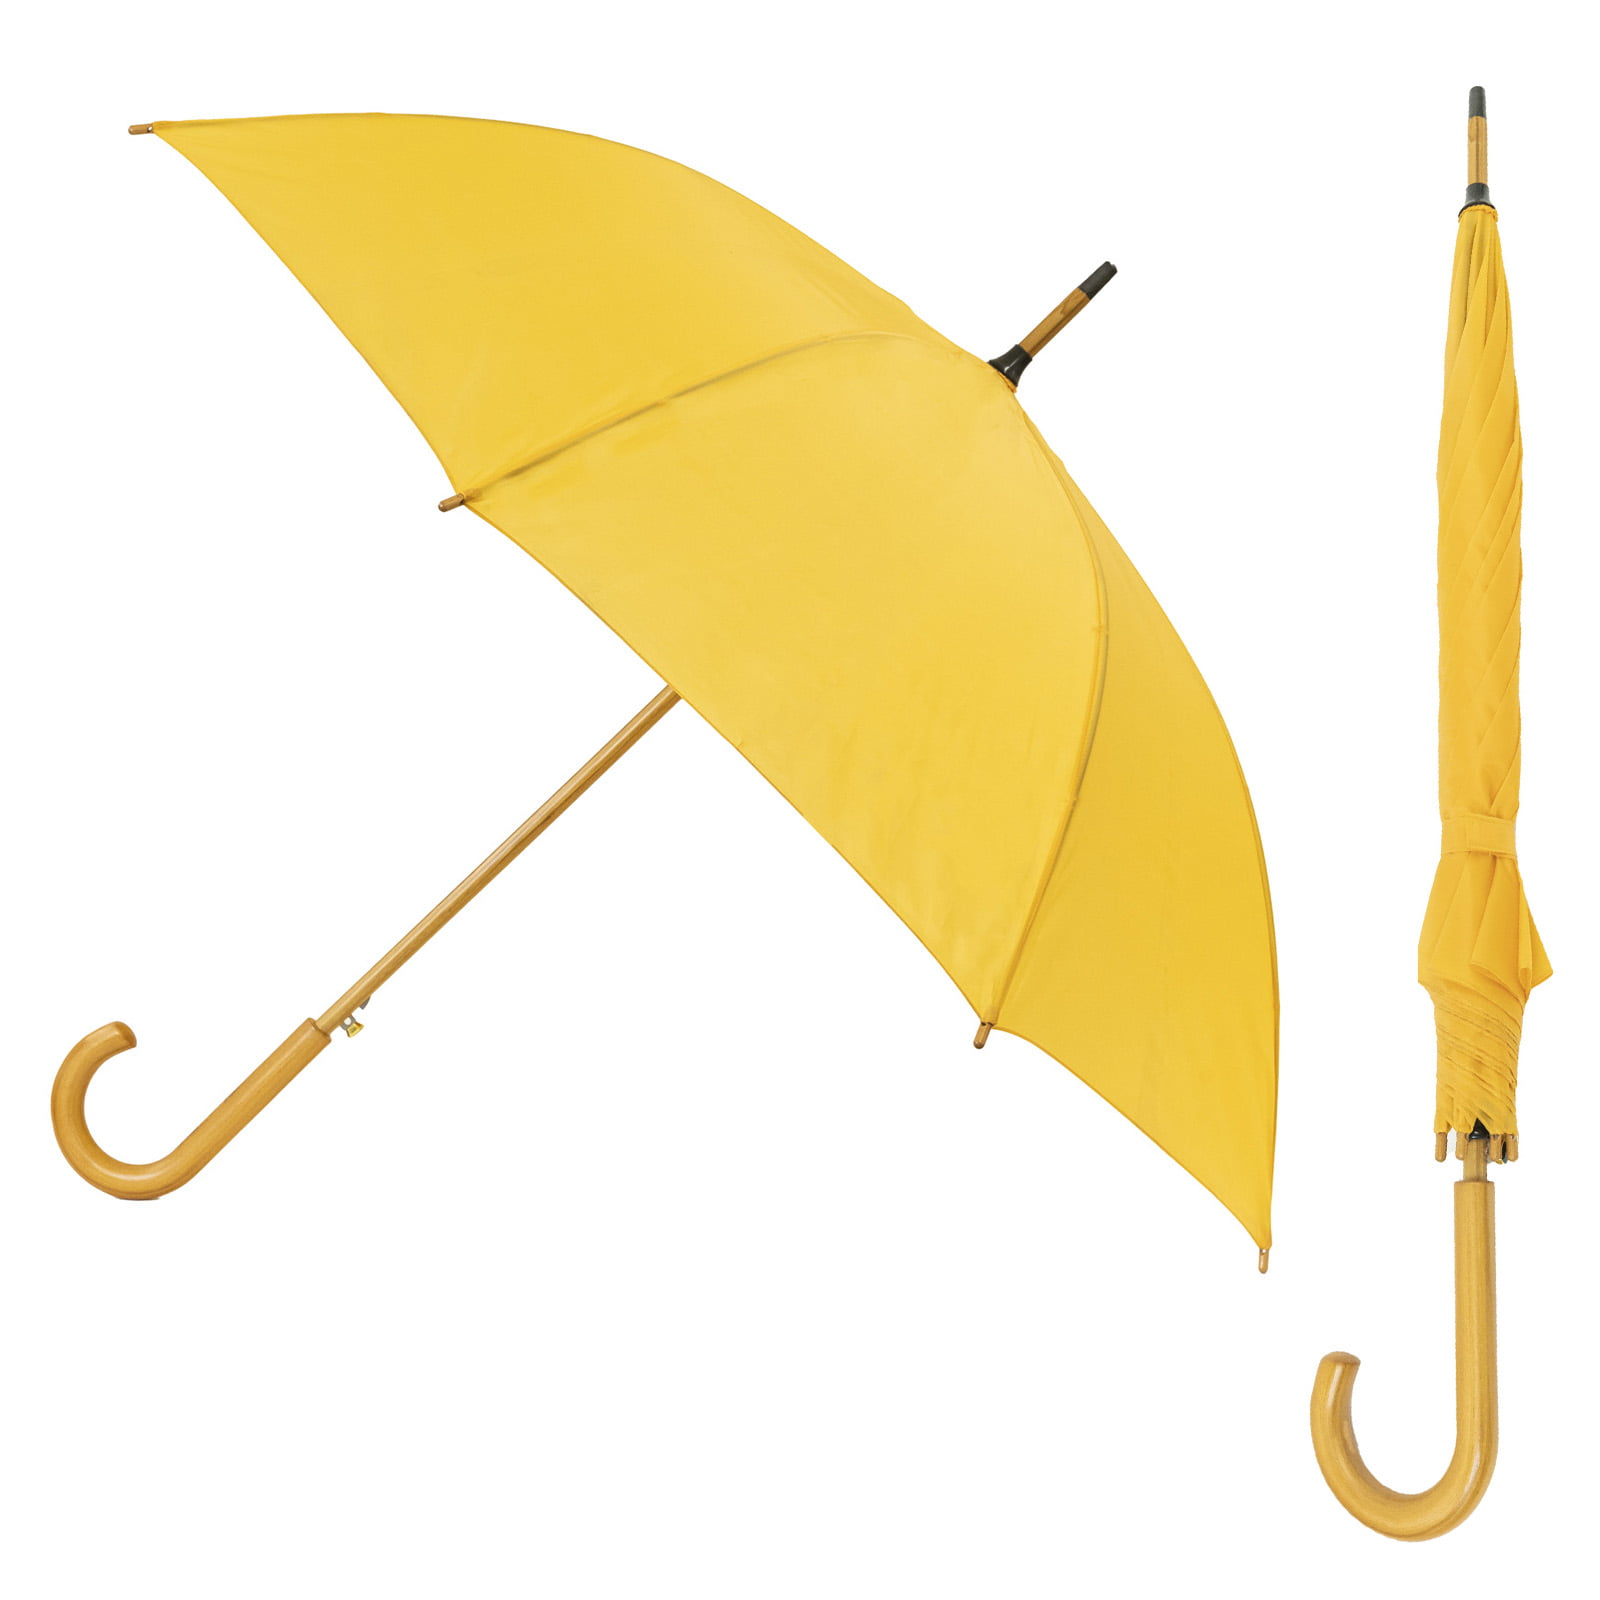 Mustard Yellow Wood Stick Umbrella composite image showing both open and closed